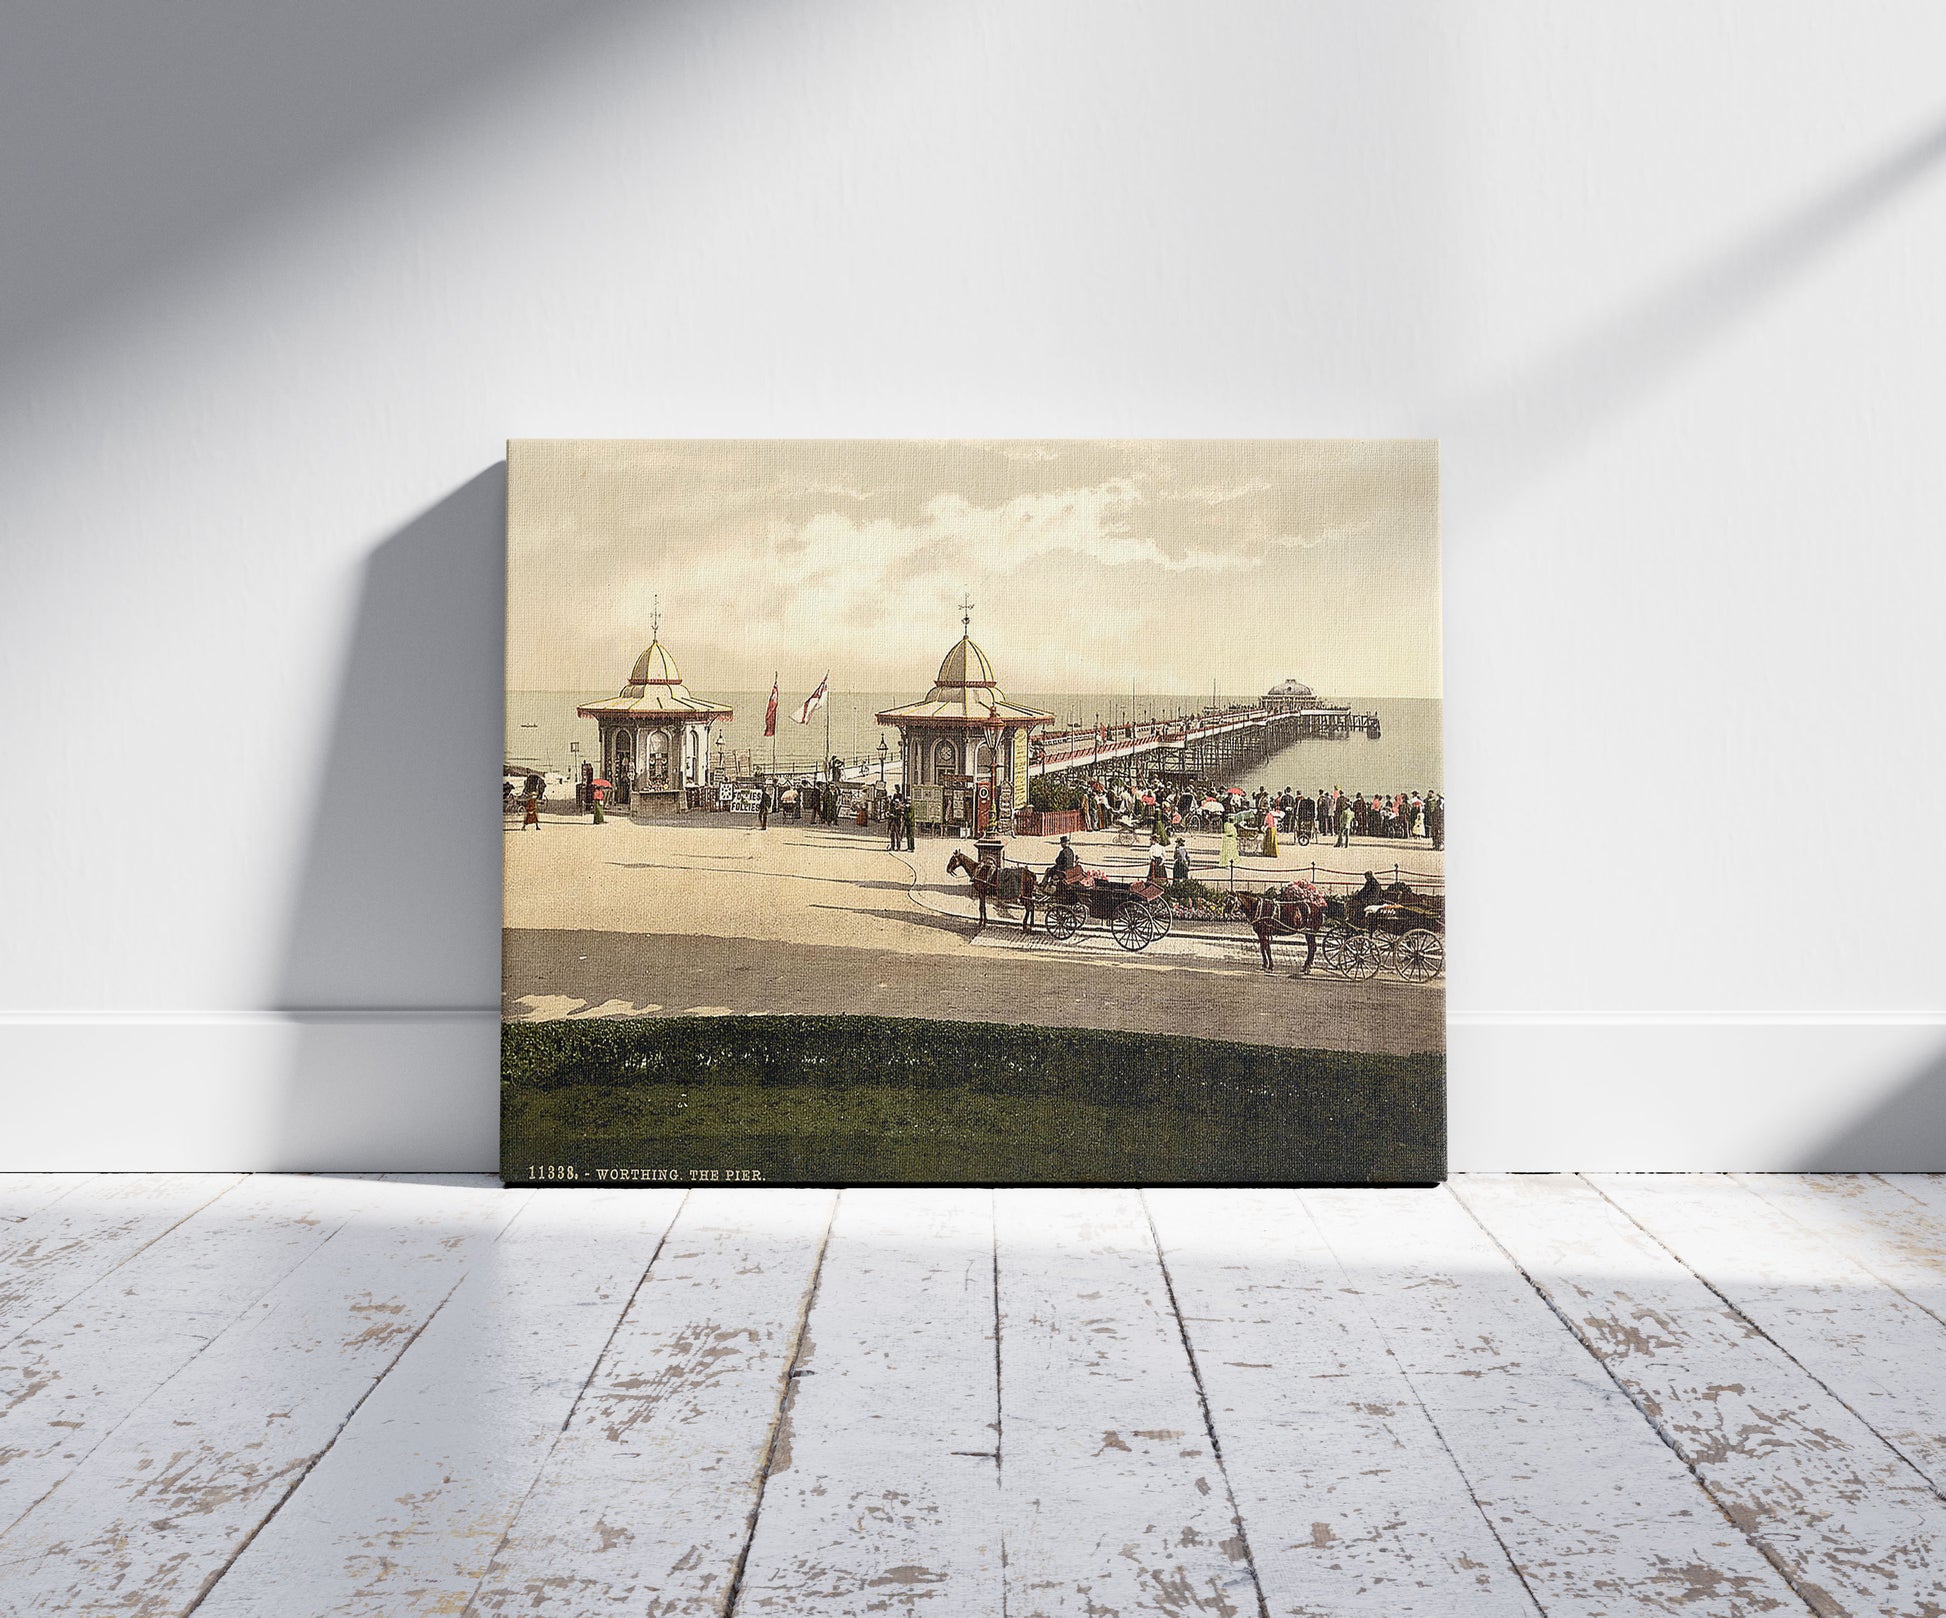 A picture of The pier, Worthing, England